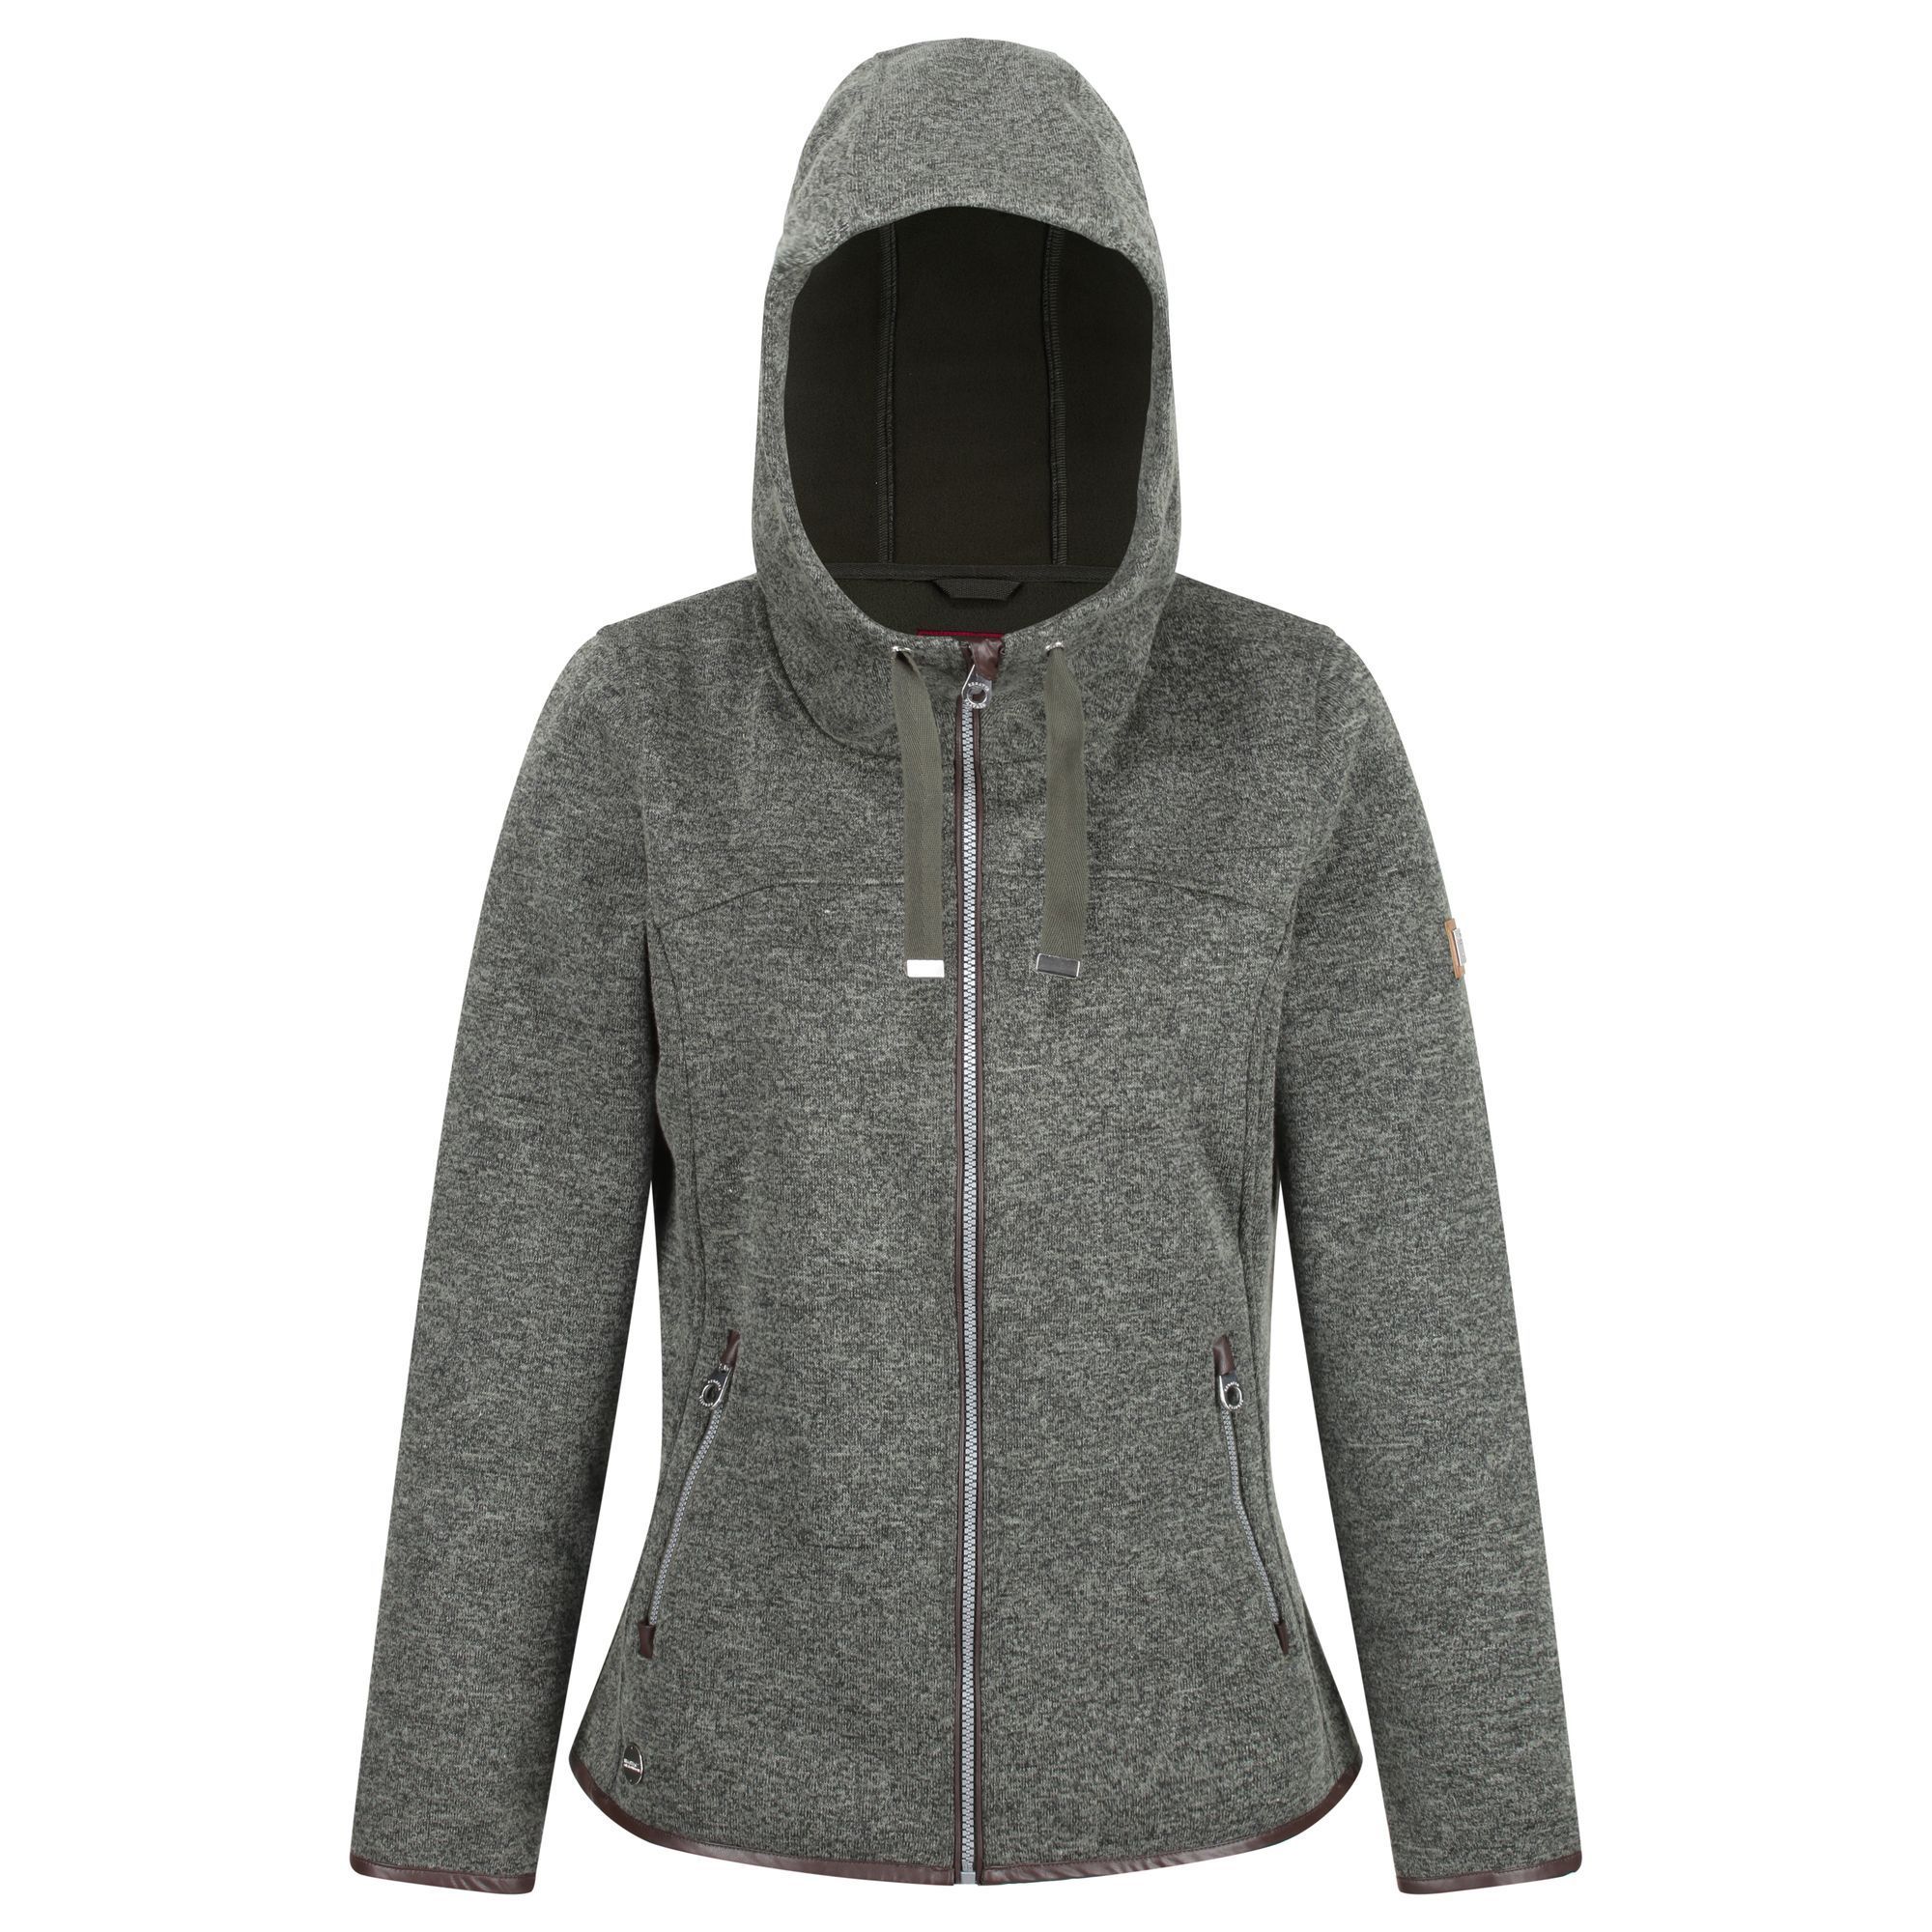 85% polyester/15% rayon wool knit effect fleece. Grown on hood with adjusters. Leatherette trim detail. 2 zipped lower pockets.